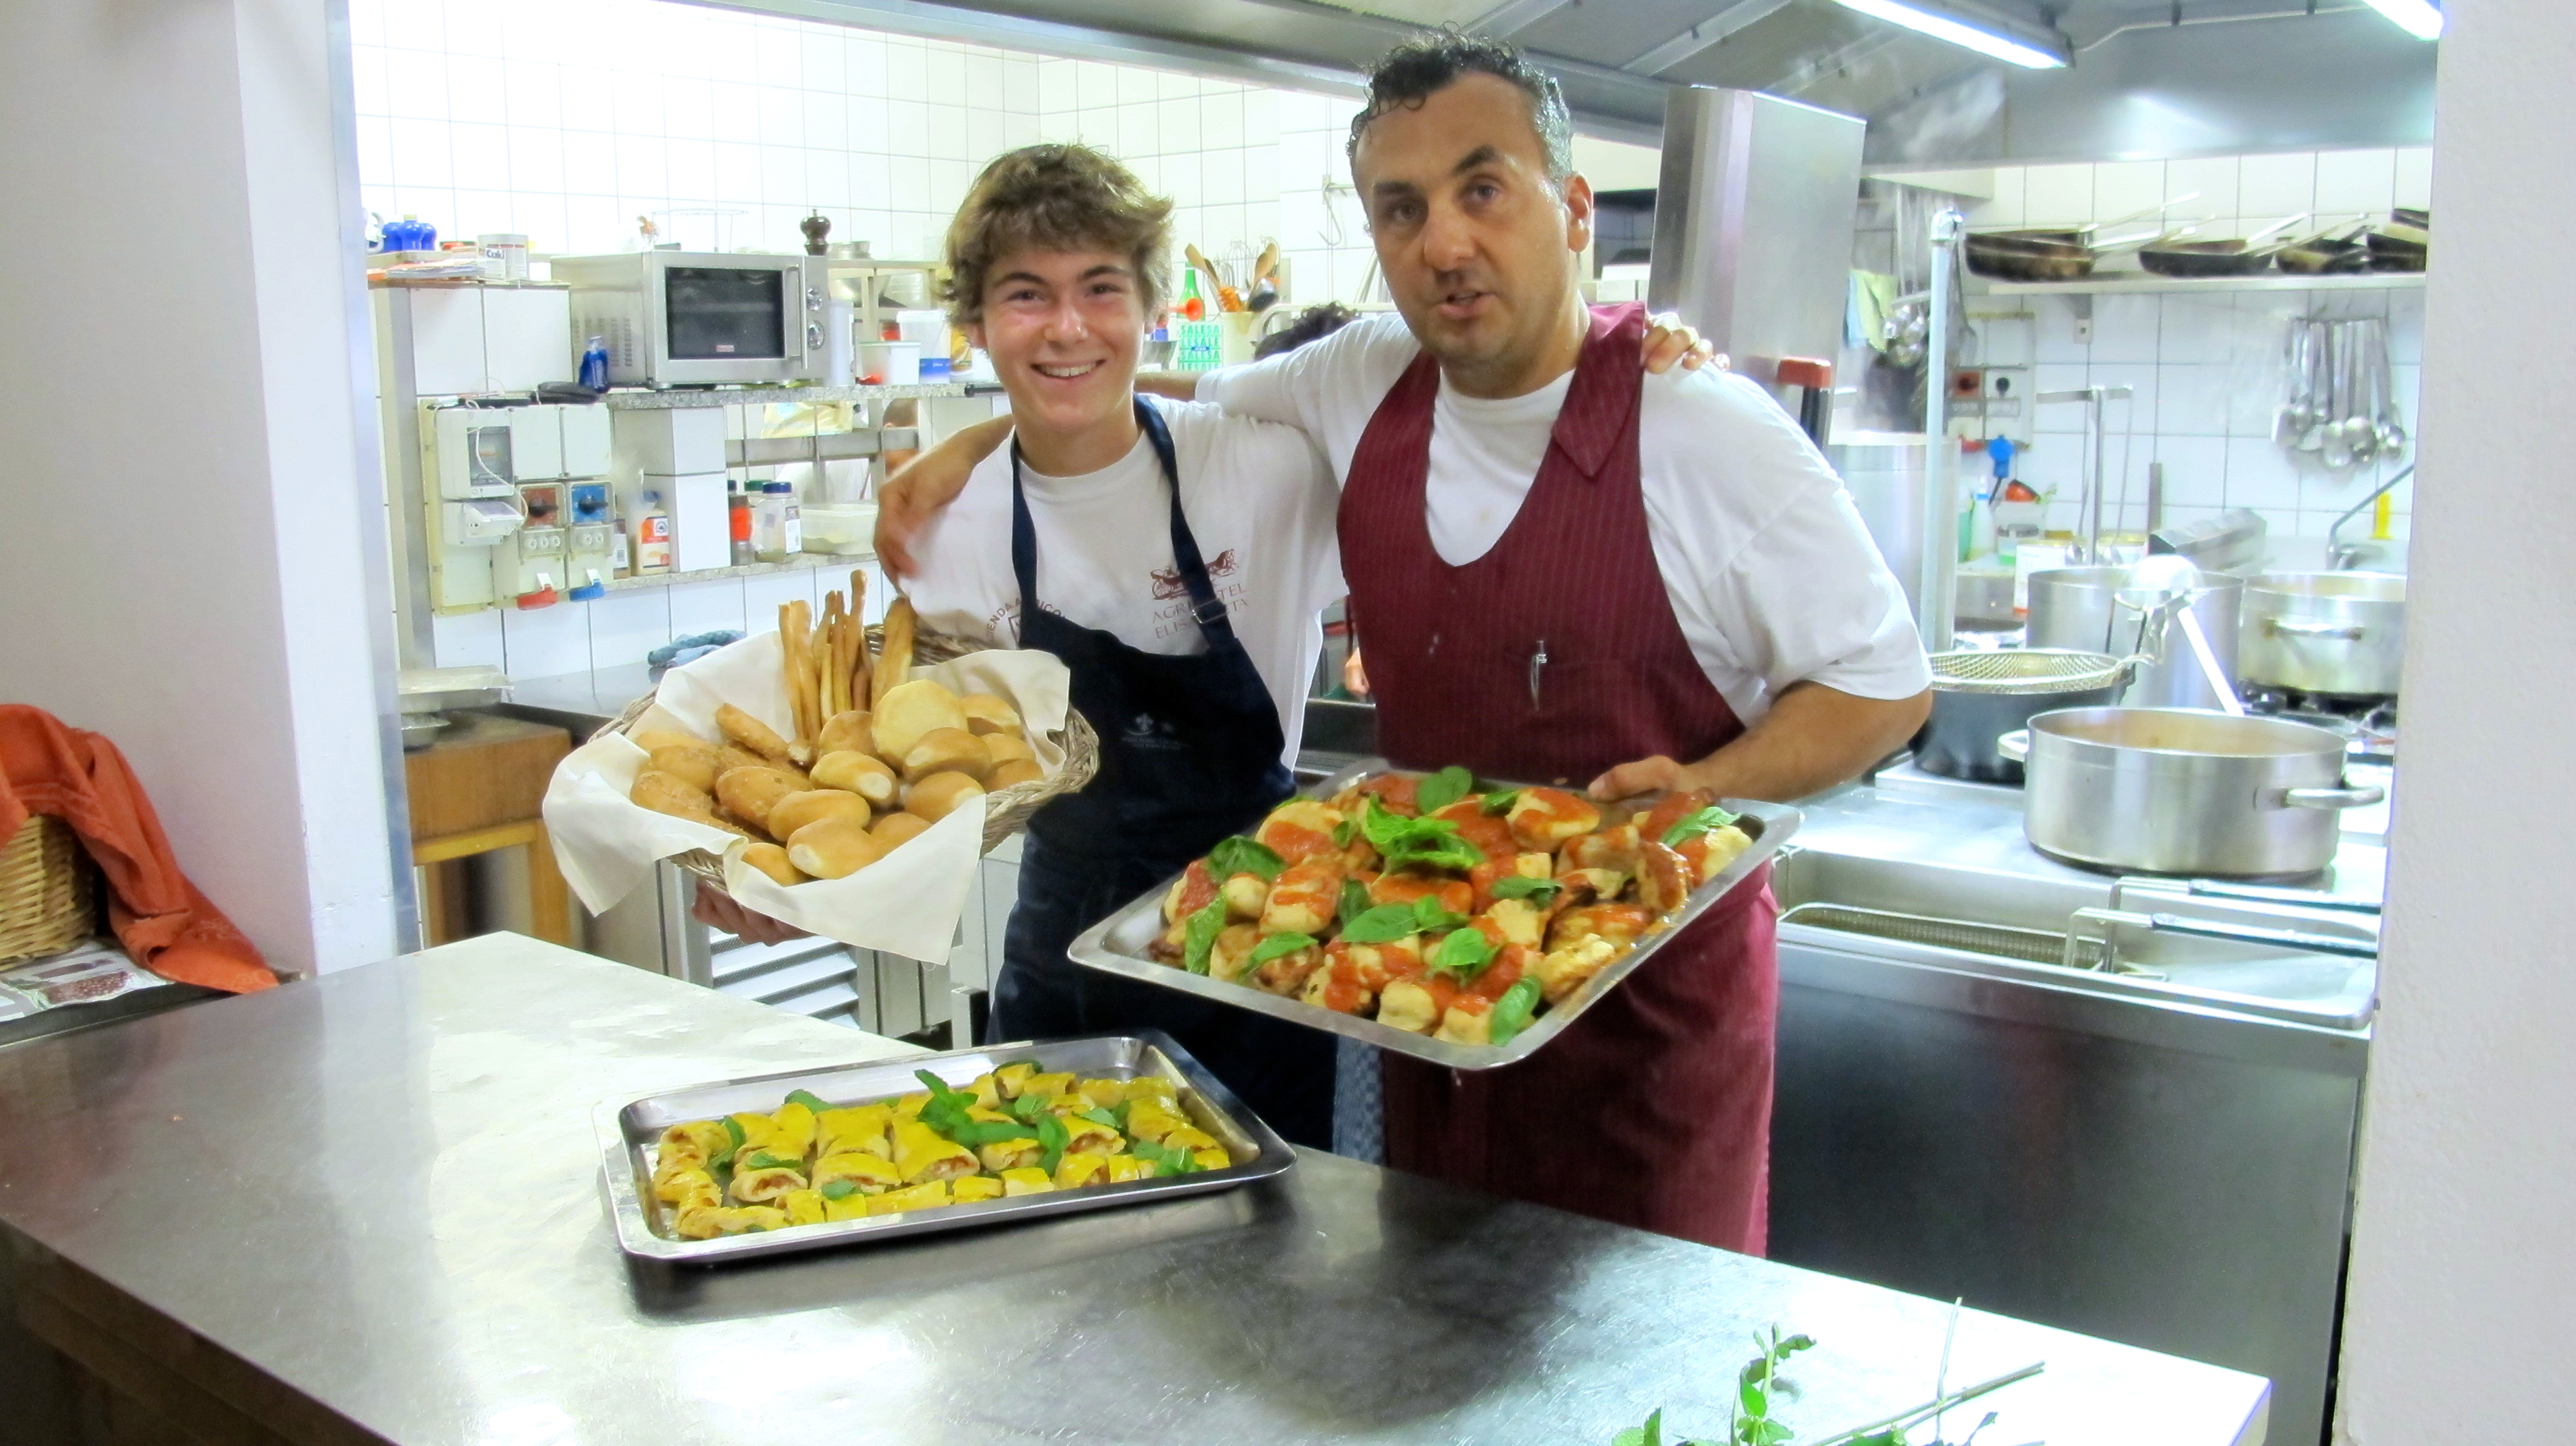 Leonardo, the Head Chef, and I holding a day's worth of creative bread work to be placed on the buffet table.